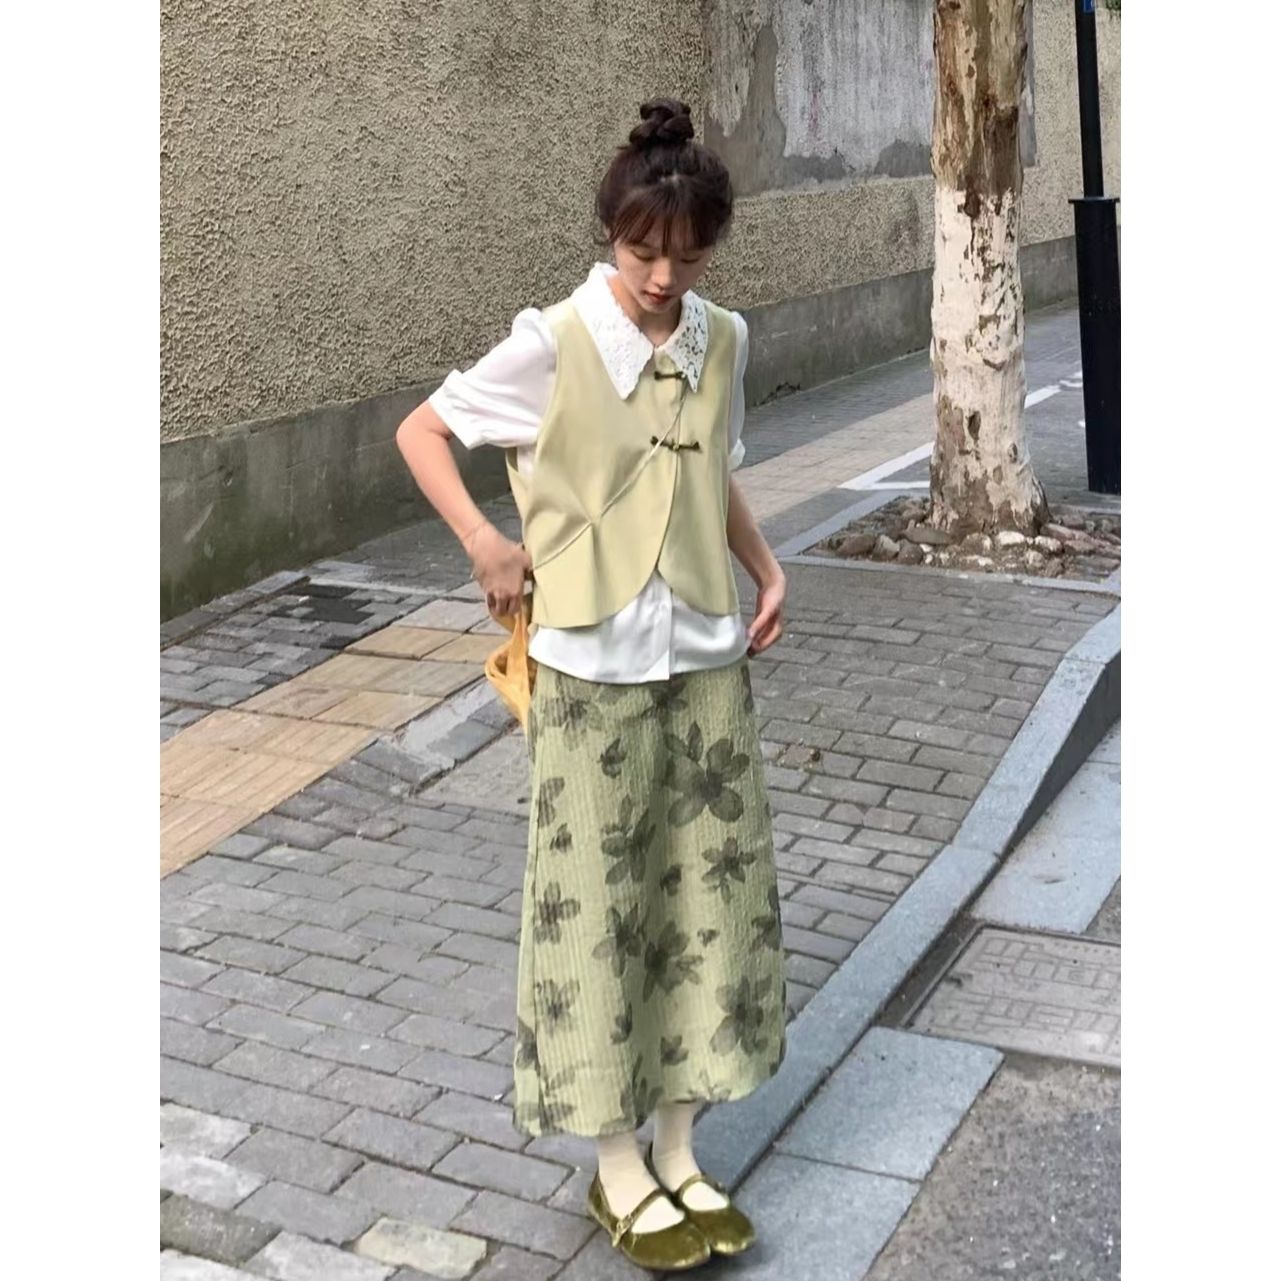 [Three-piece suit] New Chinese style national style vest vest splicing collar shirt retro high waist floral skirt